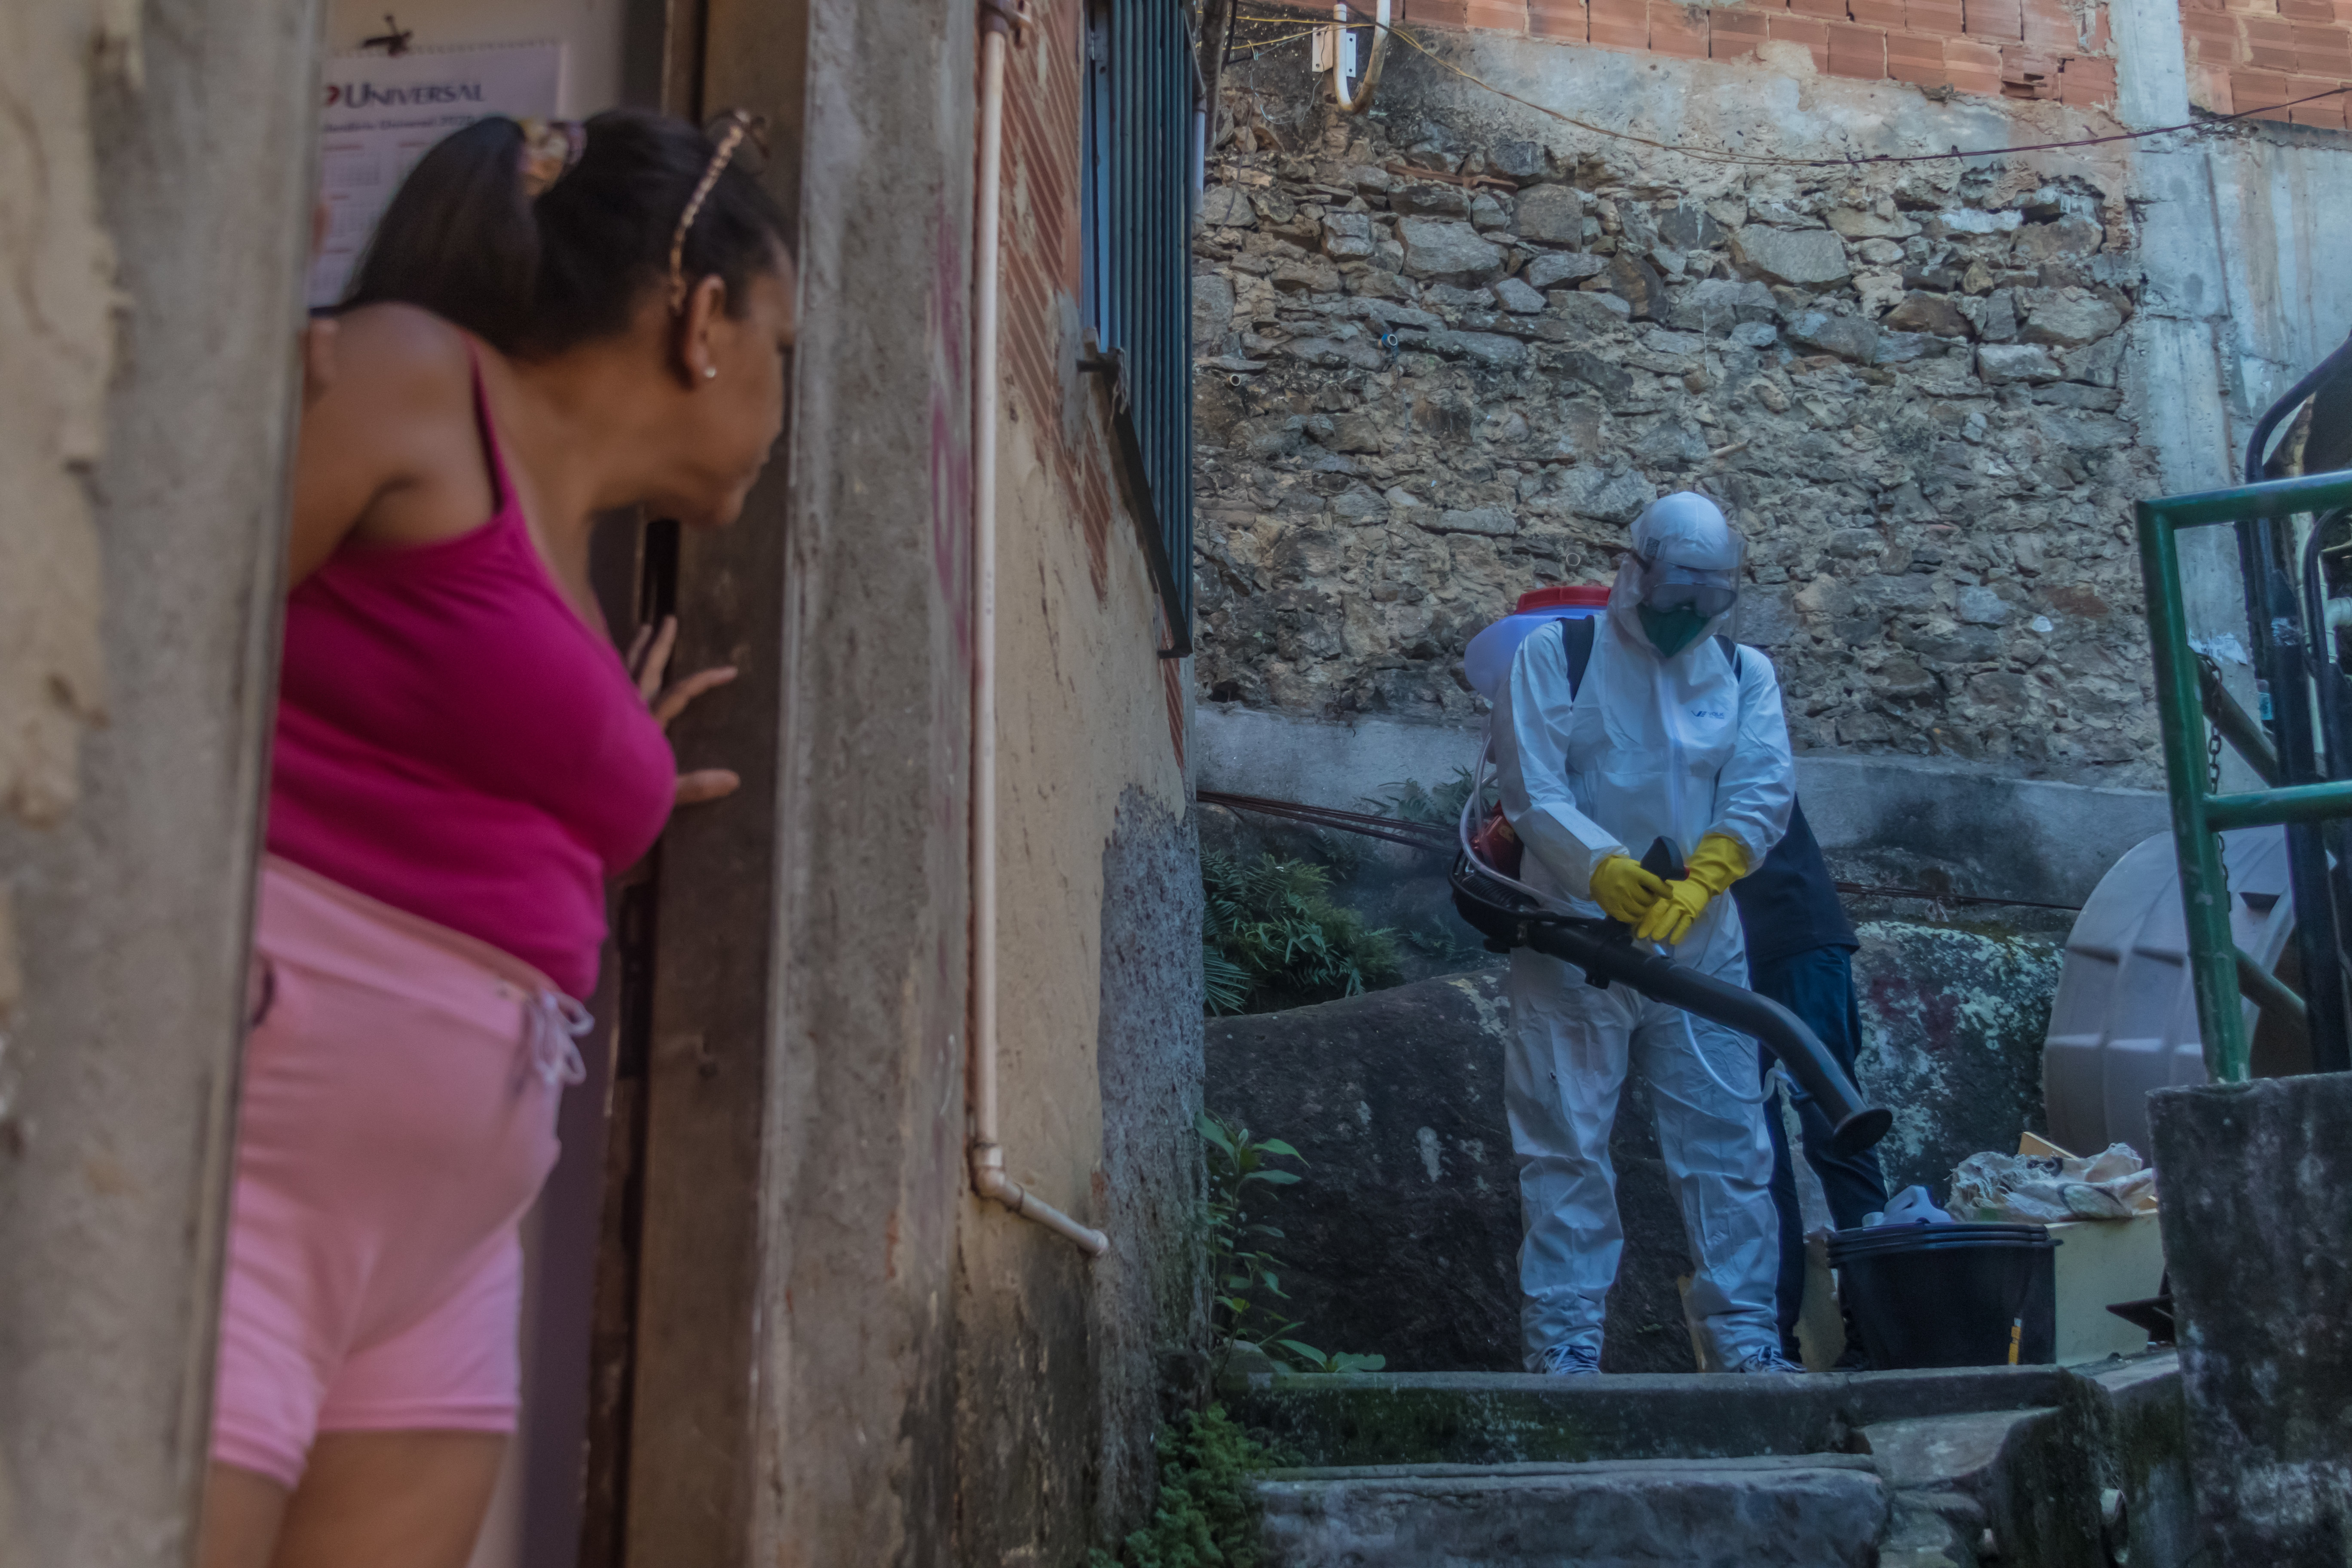 August 11, 2020 PRESS RELEASE—COVID-19 IN FAVELAS UNIFIED